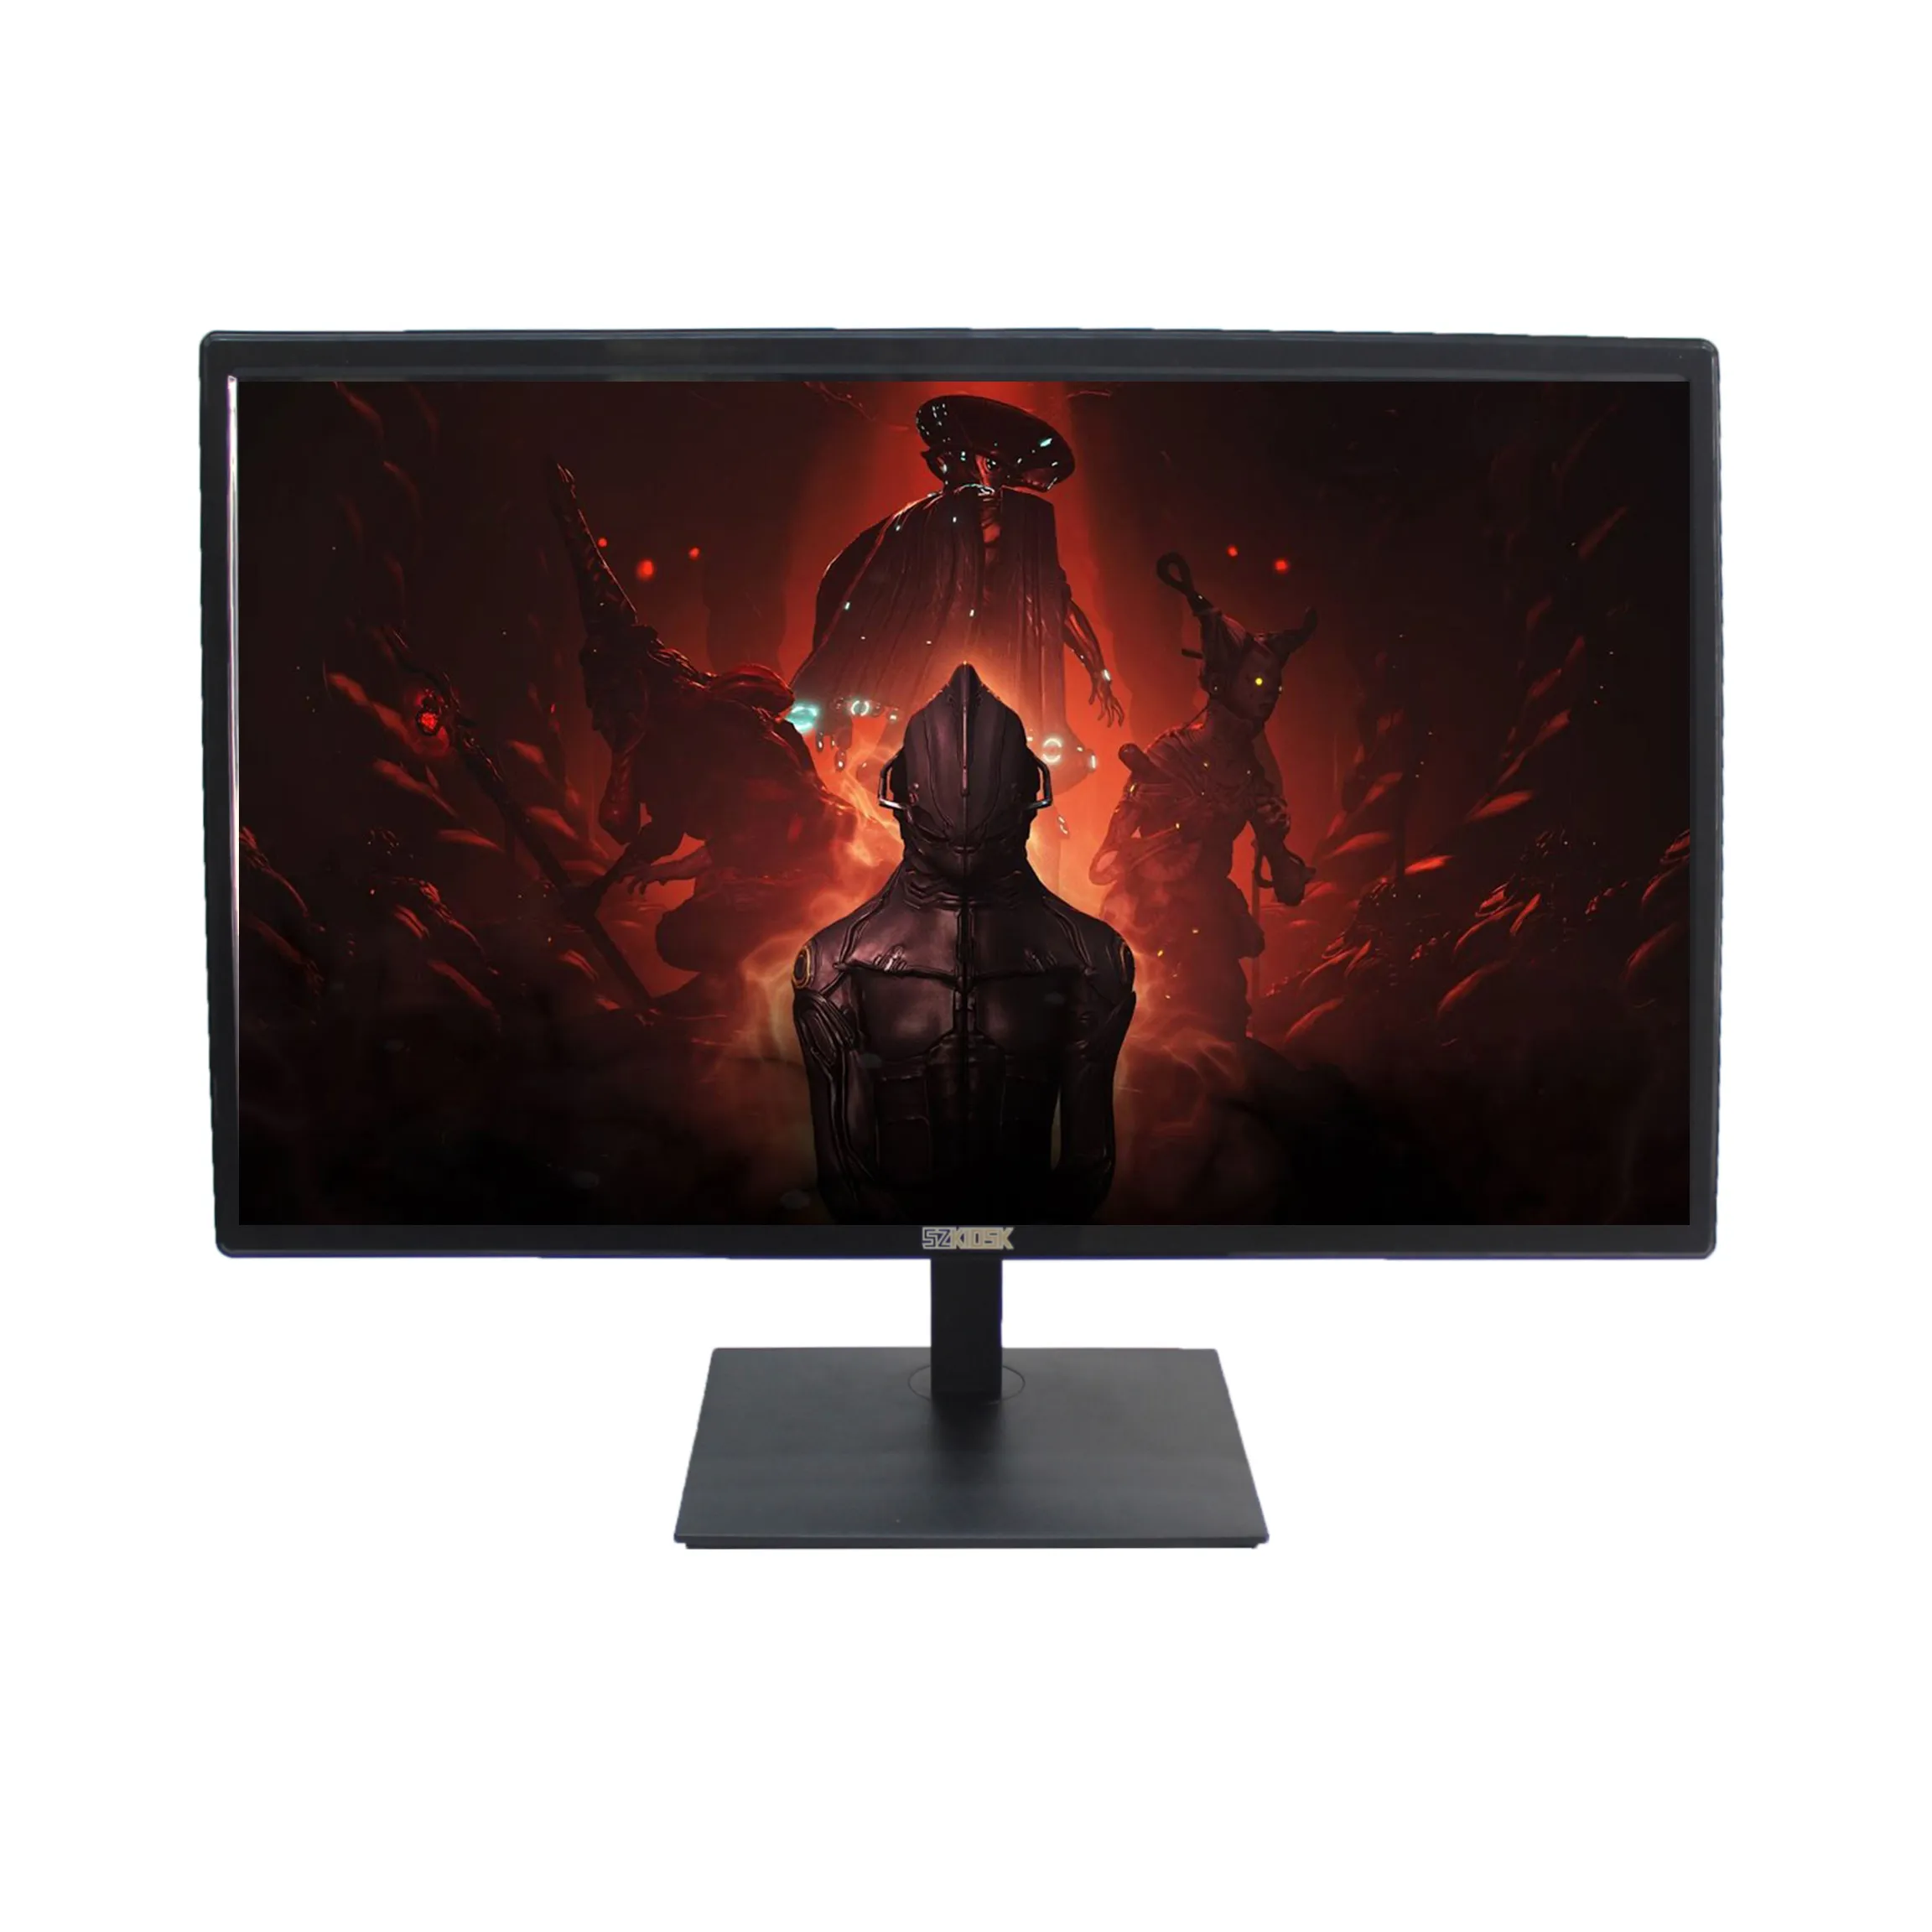 Hot Sale 144HZ PC Monitor Portable High Resolution Vivid LCD 24 inch Gaming PC Monitor 4K